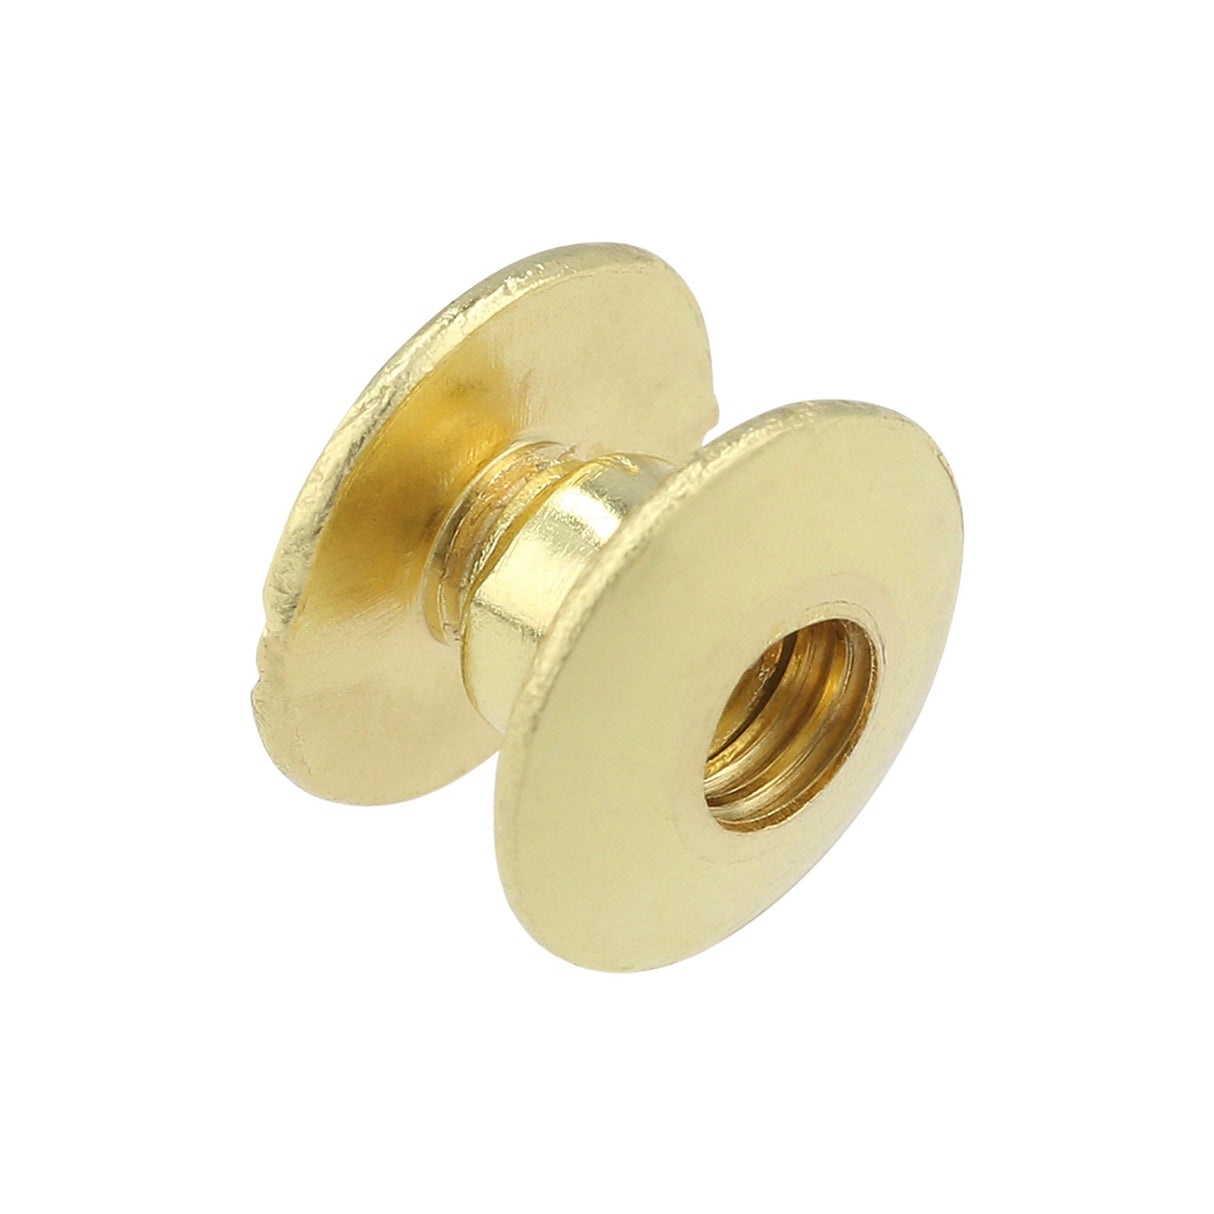 Ohio Travel Bag 1/8" Brass, Open Hole Chicago Screw, Solid Brass, #L-156OH-1-8-BP L-156OH-1-8-BP